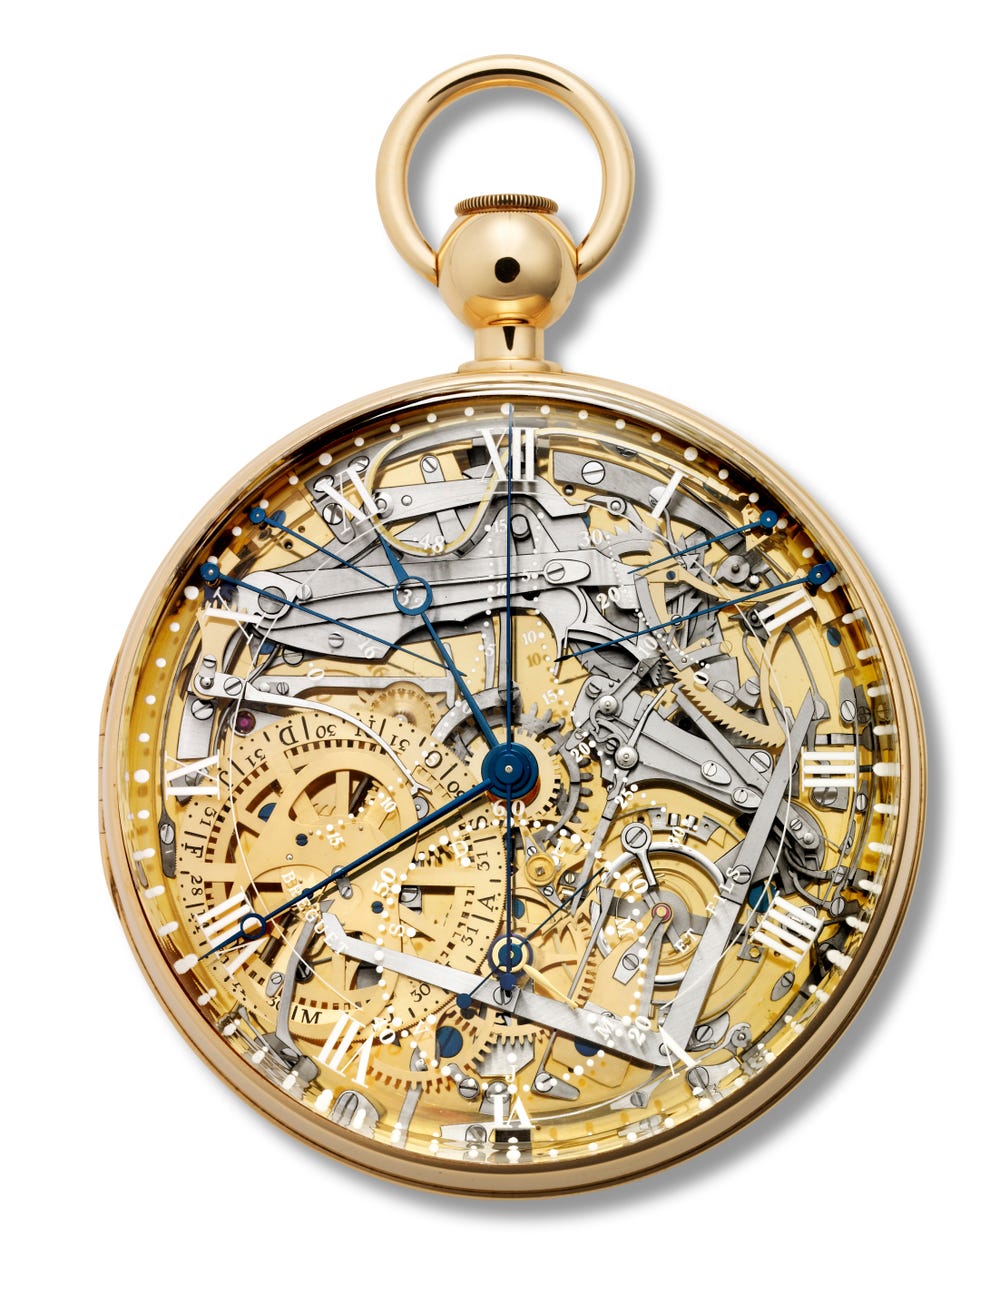 Photograph of intricate gold and silver pocket watch with visible gears.